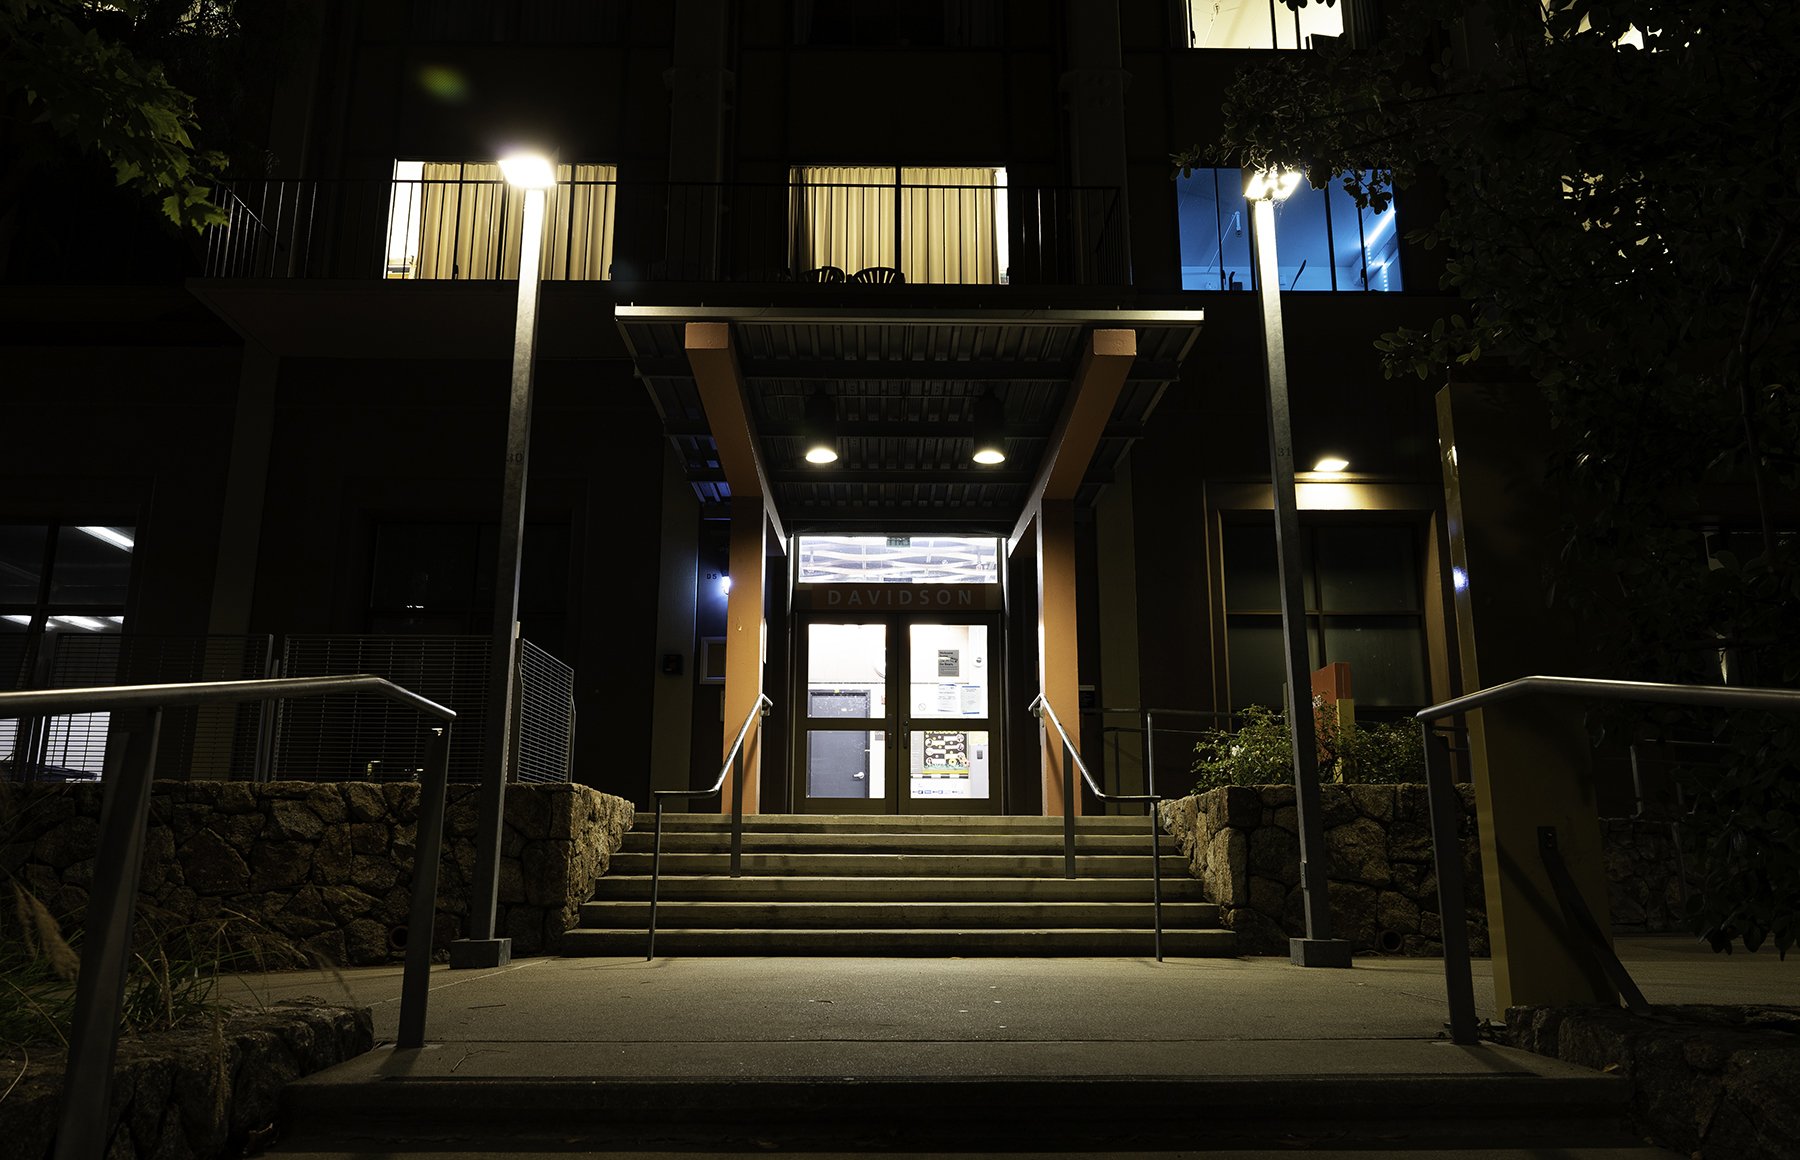 Sexual battery reported at UC Berkeley residential hall